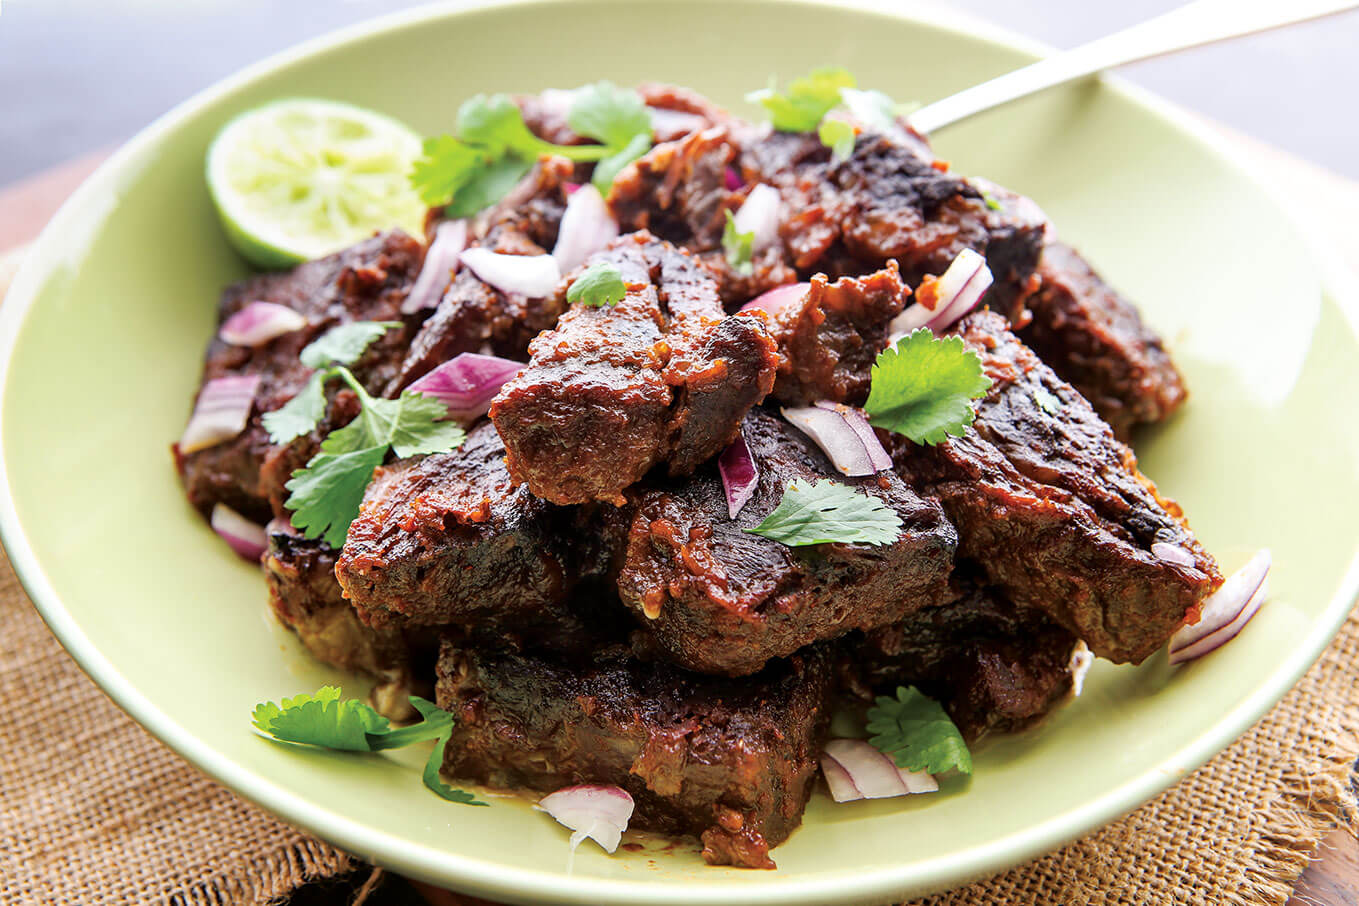 Thermomix Tamarind Chipotle Ribs